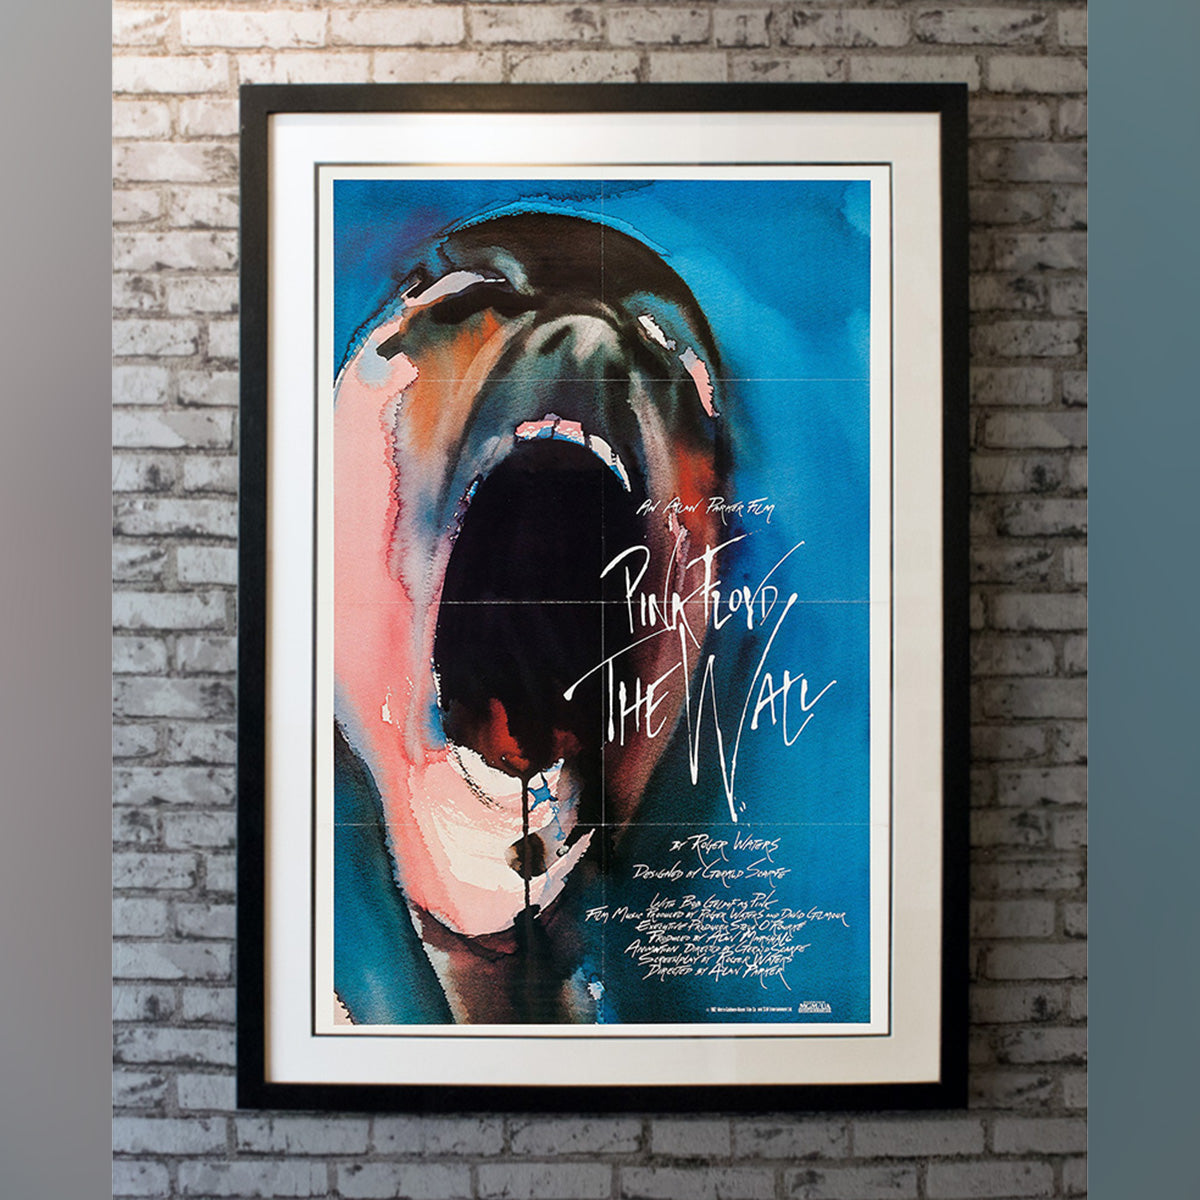 Original Movie Poster of Pink Floyd The Wall (1982)